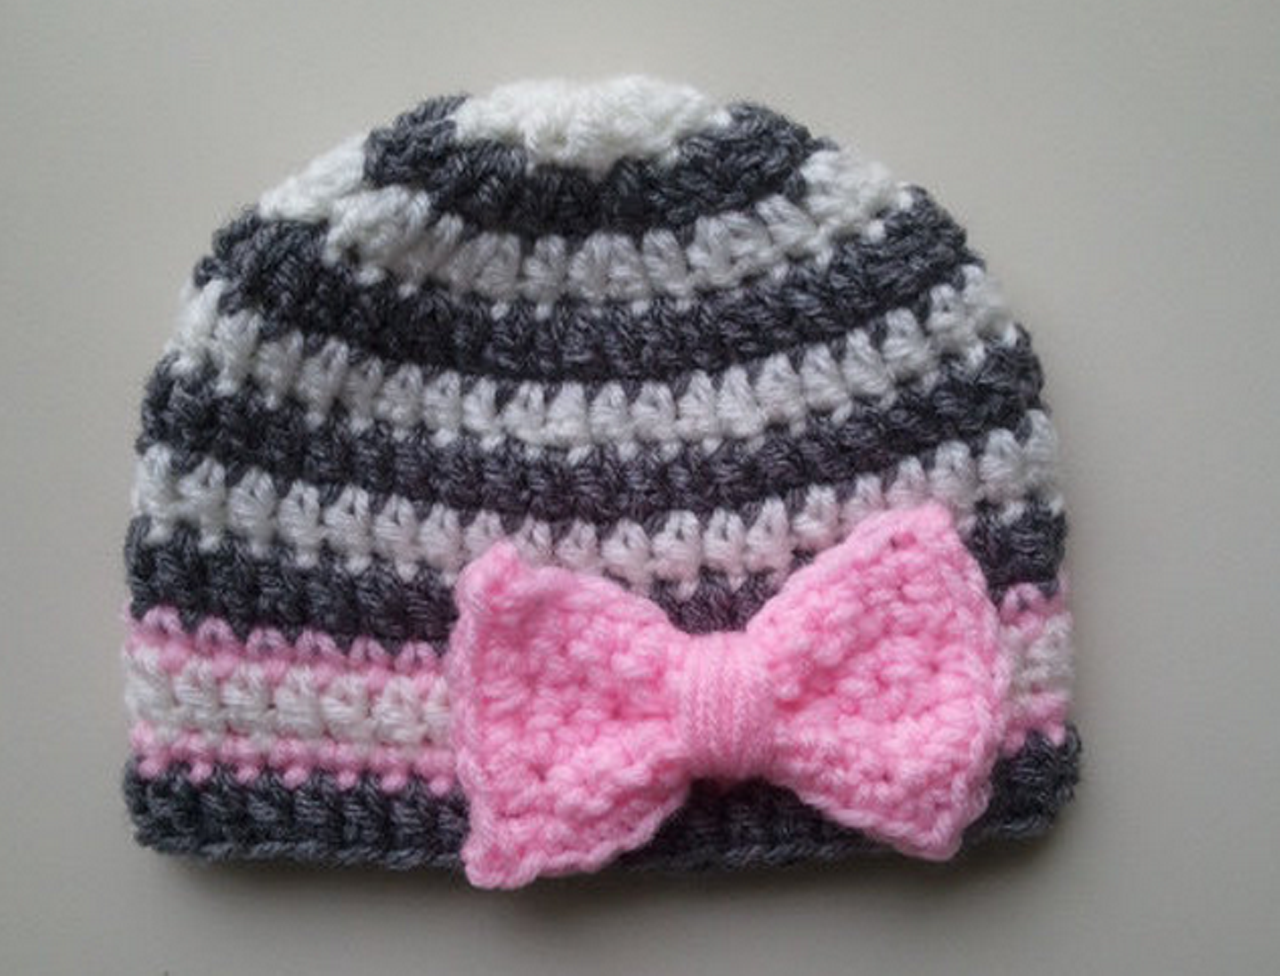 Hats 4 Brats
This Etsy shop features crocheted baby hats so adorable just looking at them may instill a desire to reproduce.